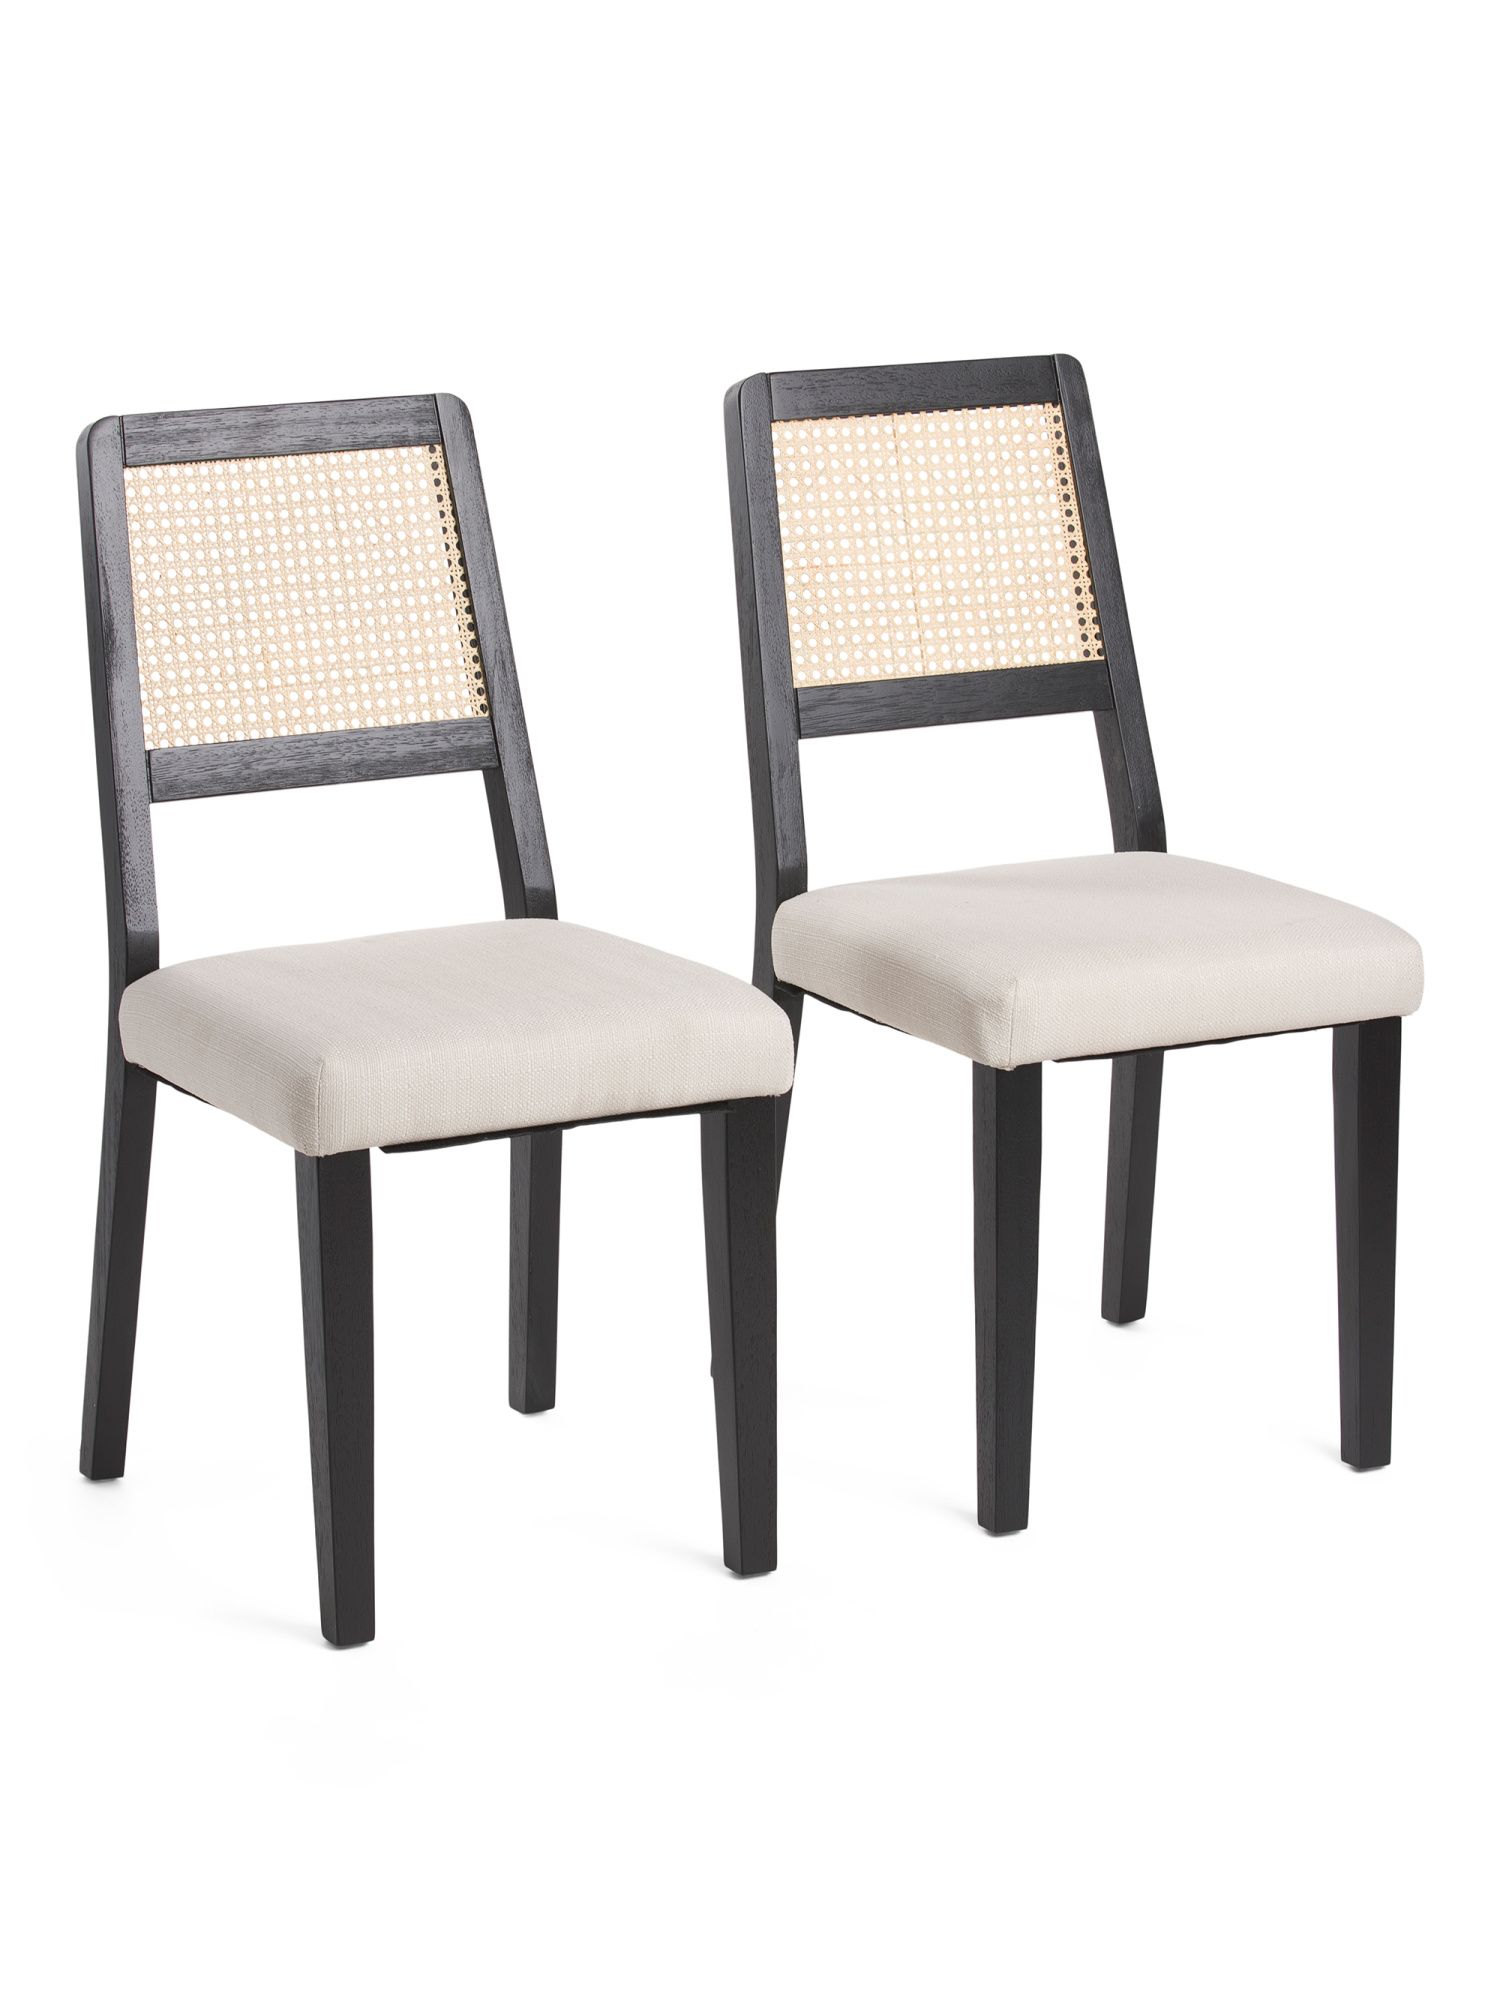 Set Of 2 Archie Cane Back Dining Chairs | Kitchen & Dining Room | Marshalls | Marshalls